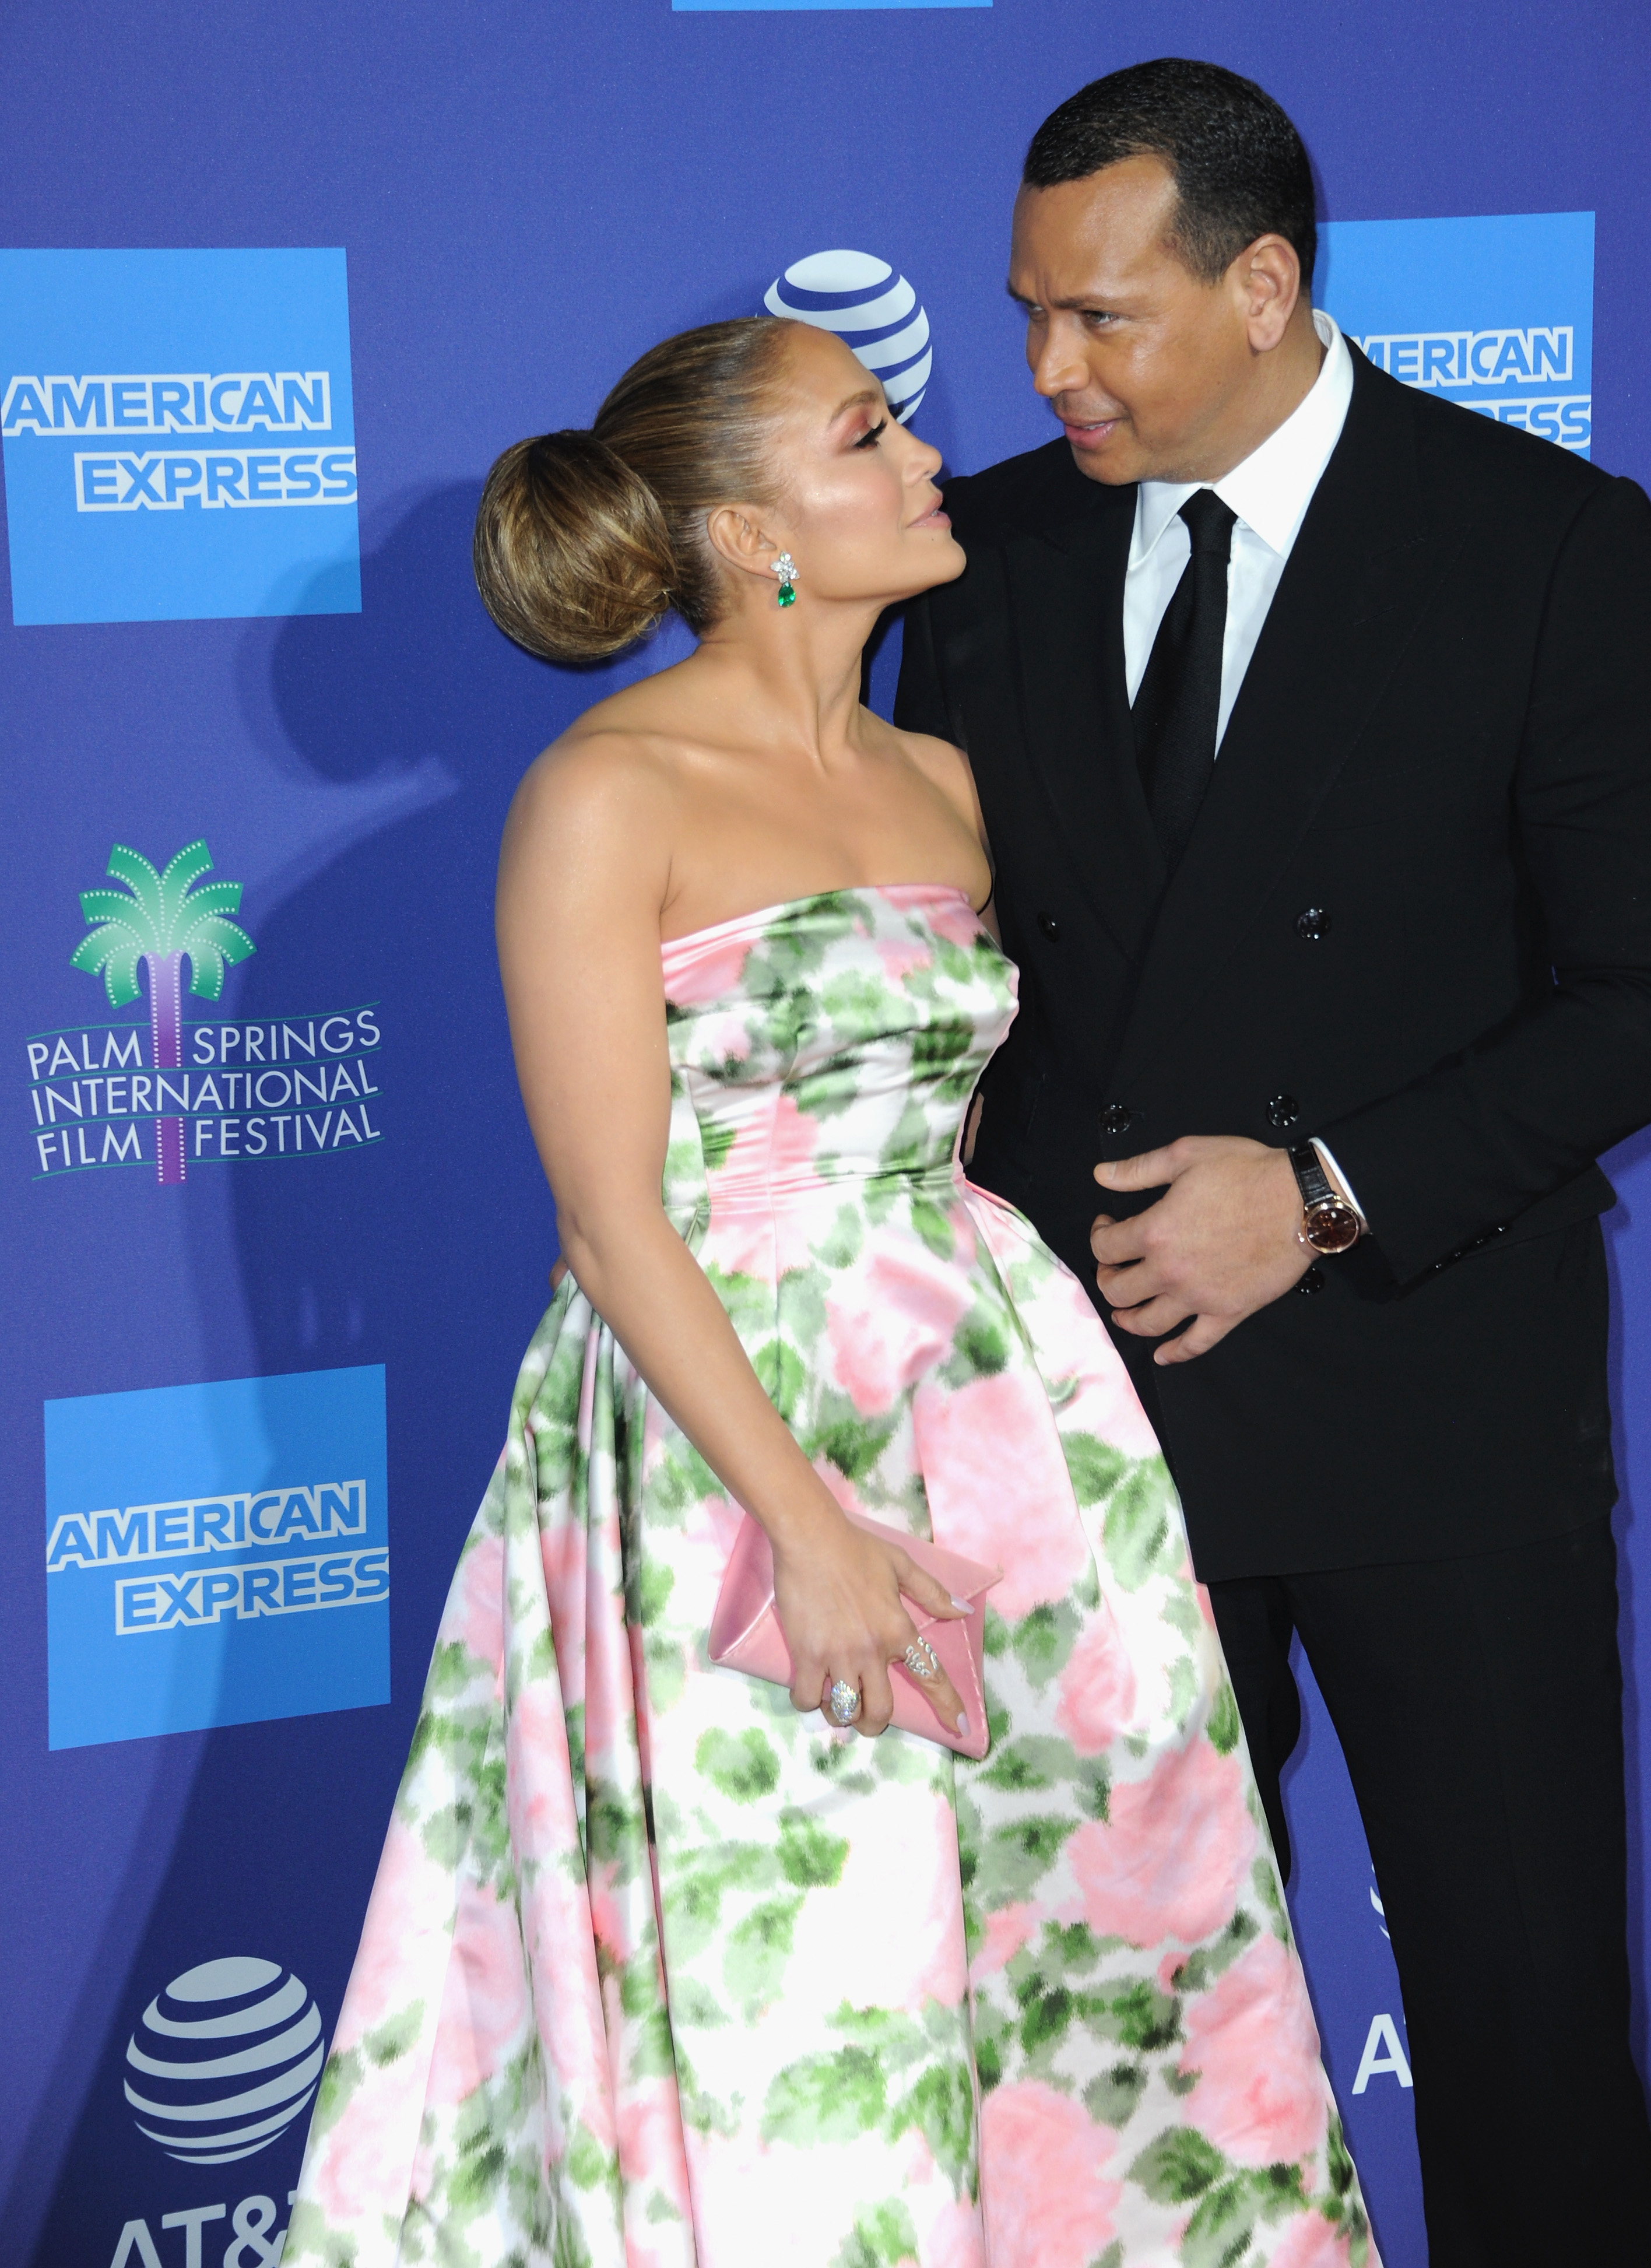 Jennifer Lopez and Alex Rodriguez at the Annual Palm Springs International Film Festival Film Awards Gala on January 2, 2020, in Palm Springs, California | Source: Getty Images